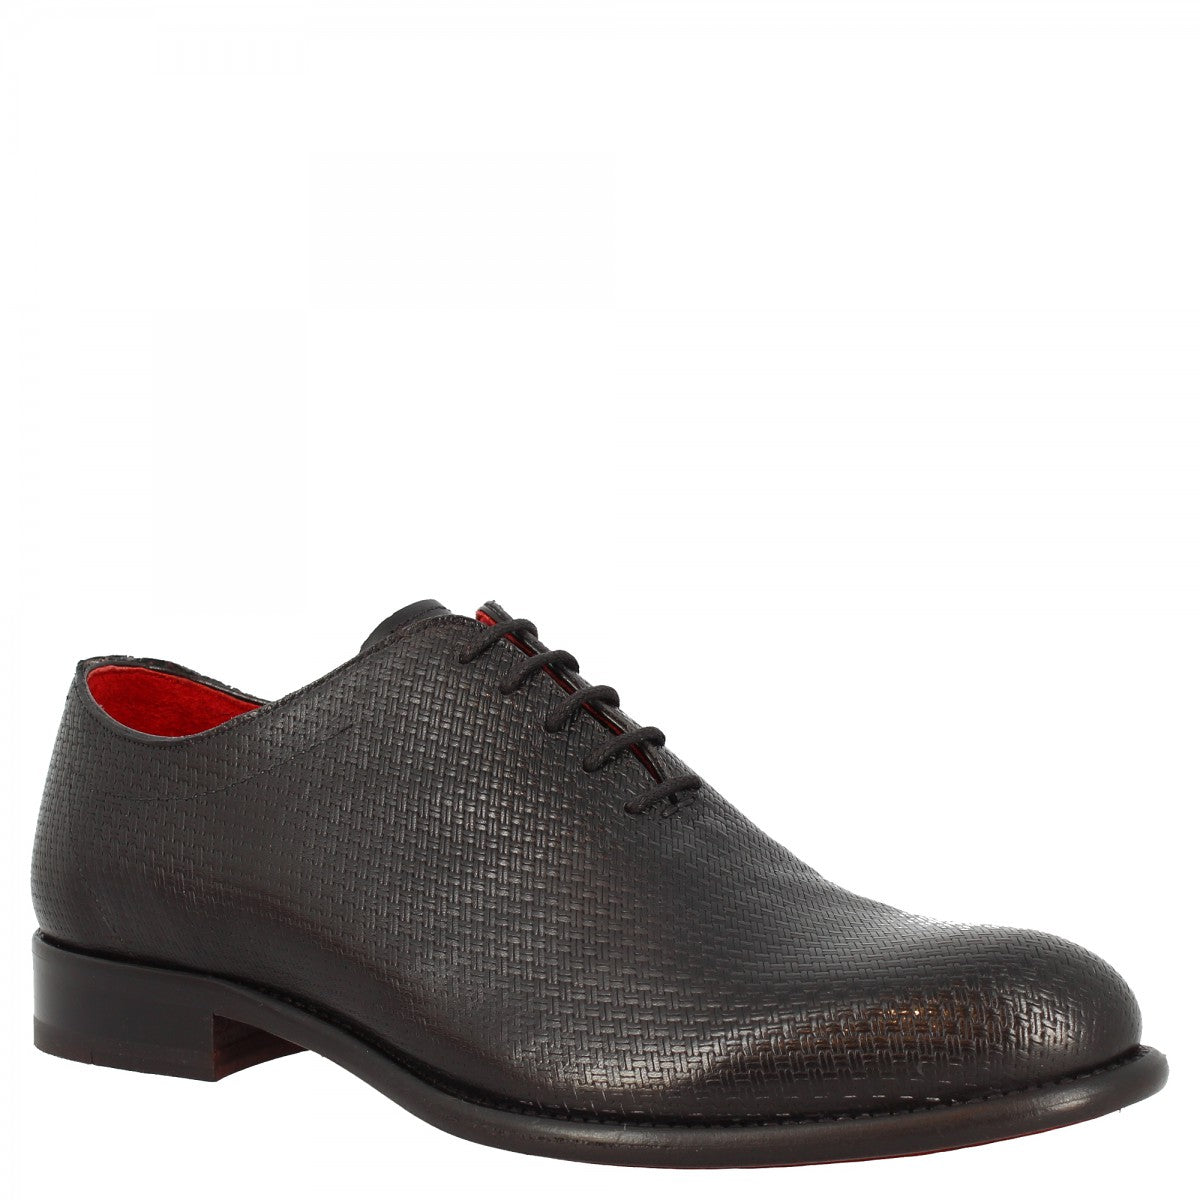 Men's handmade round toe brogues shoes in black Montecarlo calf leather